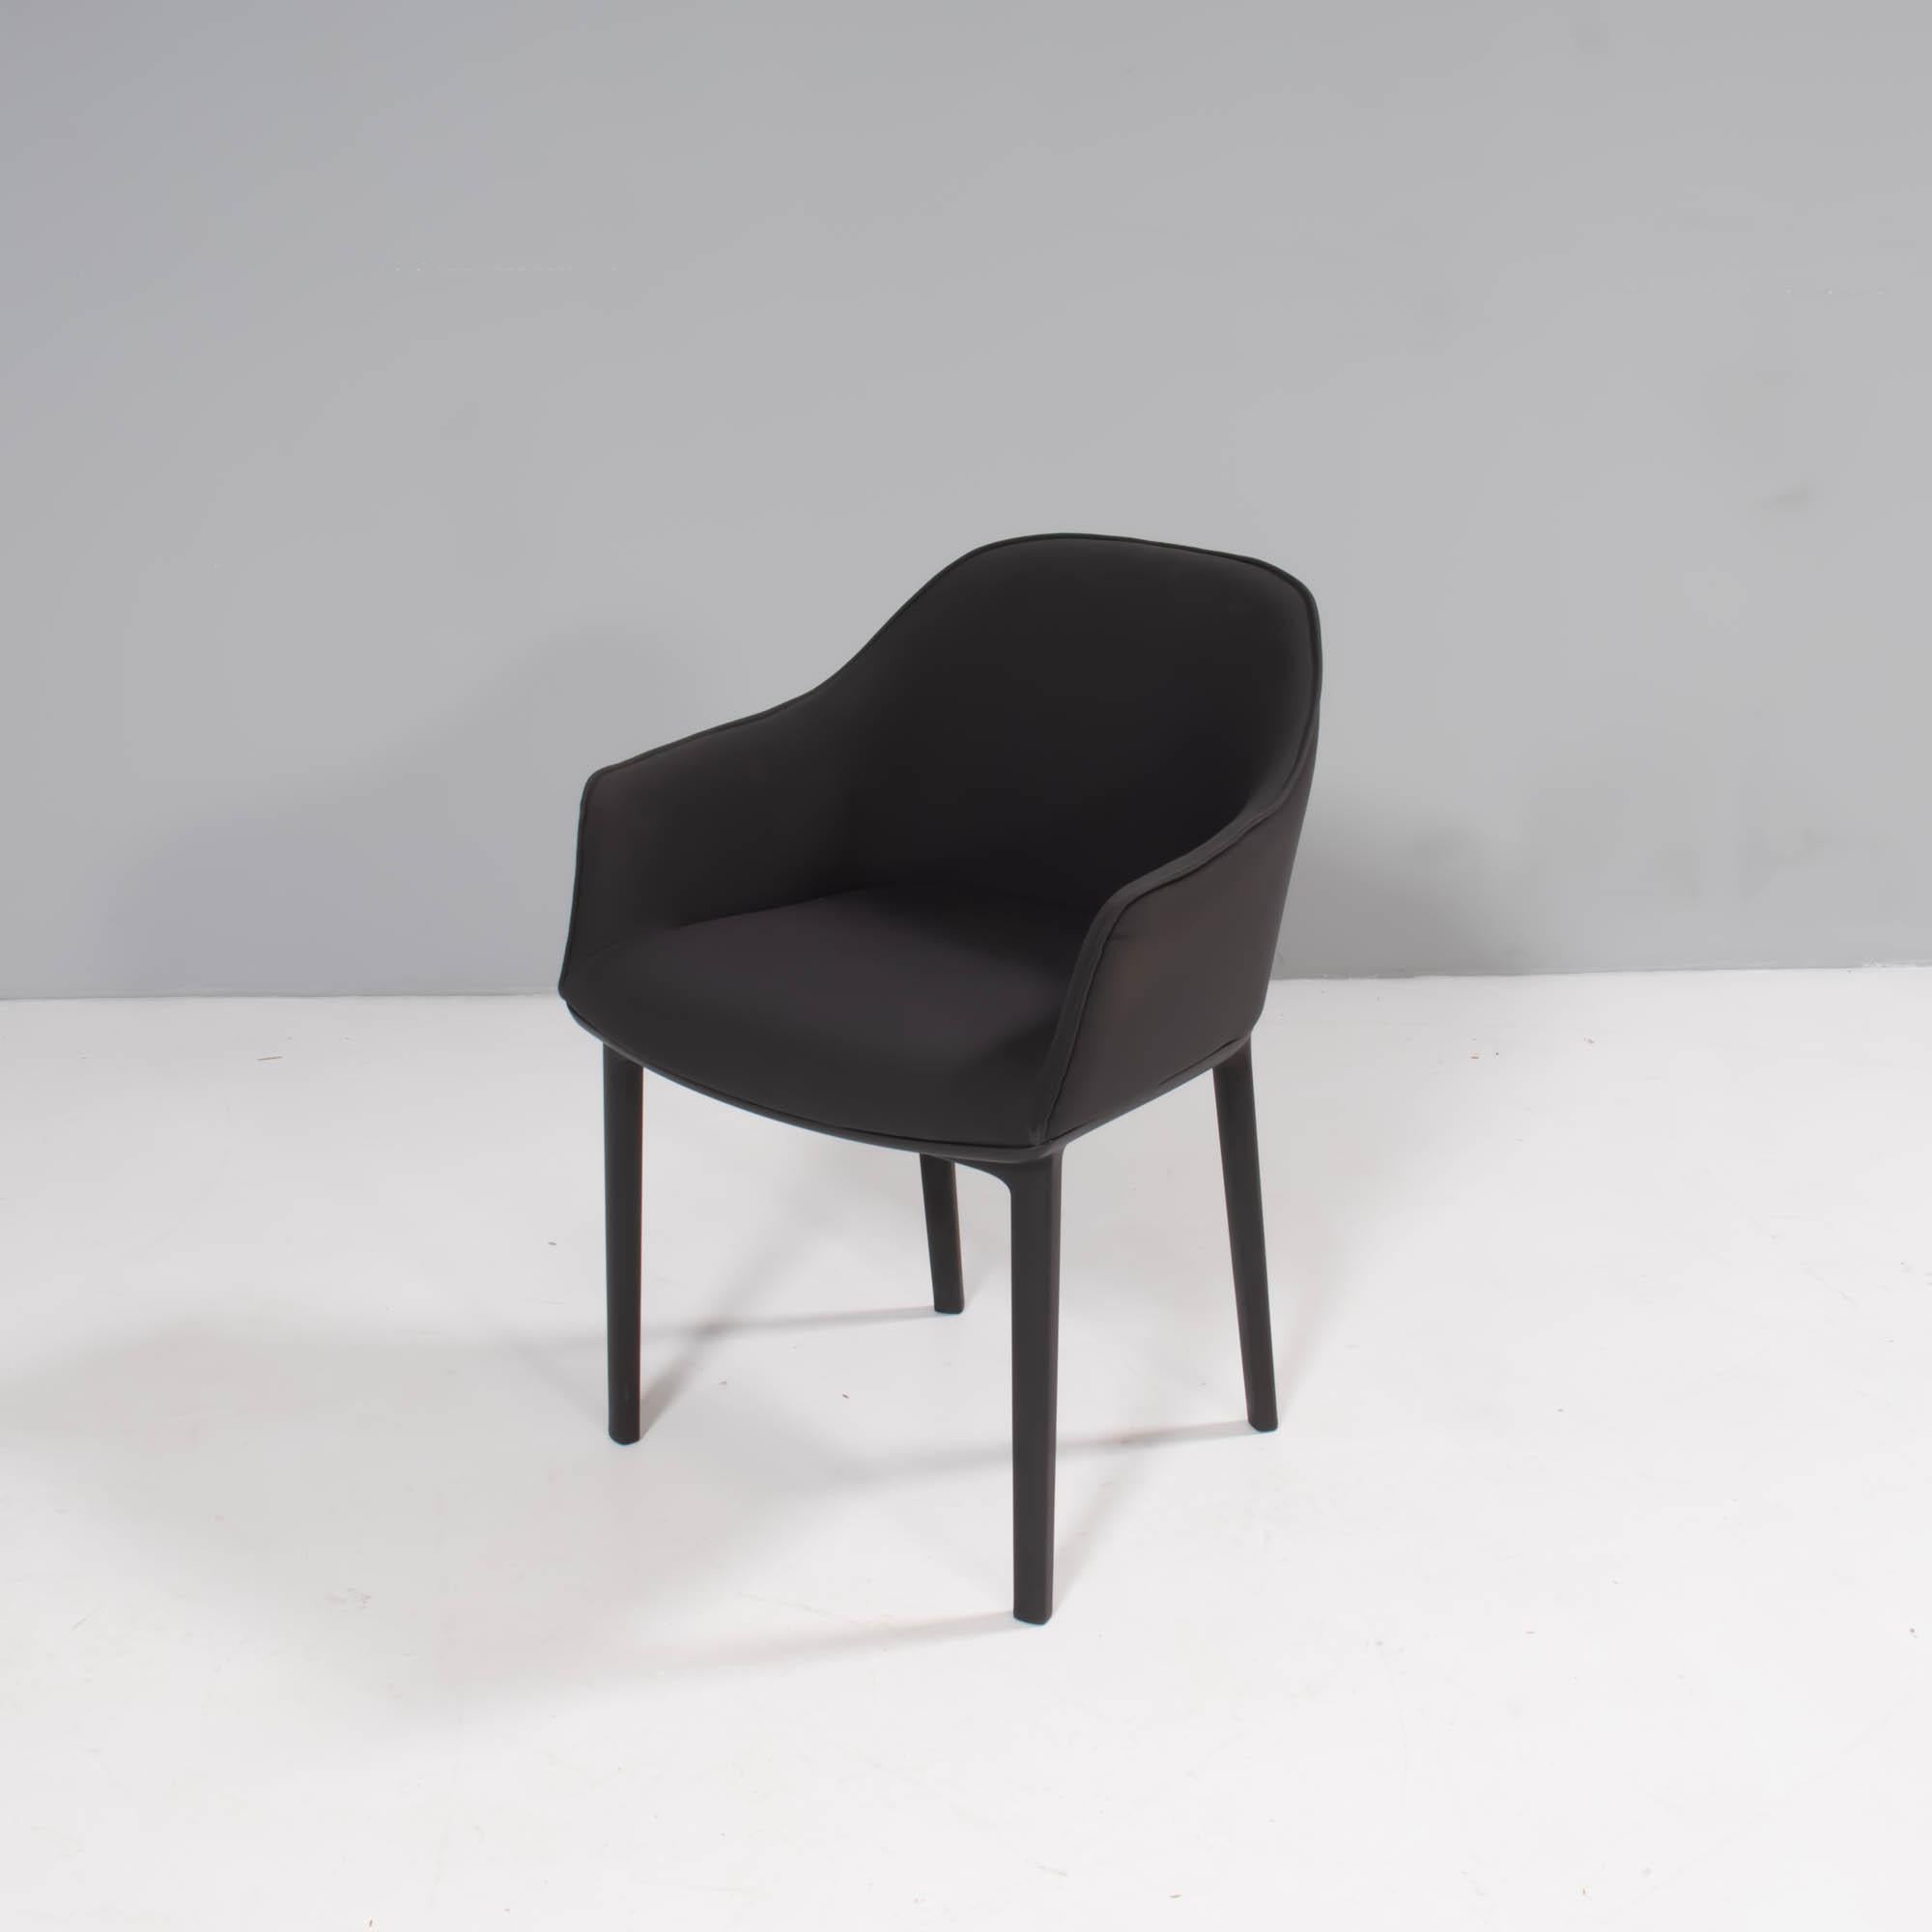 Fabric Vitra by Ronan & Erwan Bouroullec Softshell Black Dining Chairs, Set of 6